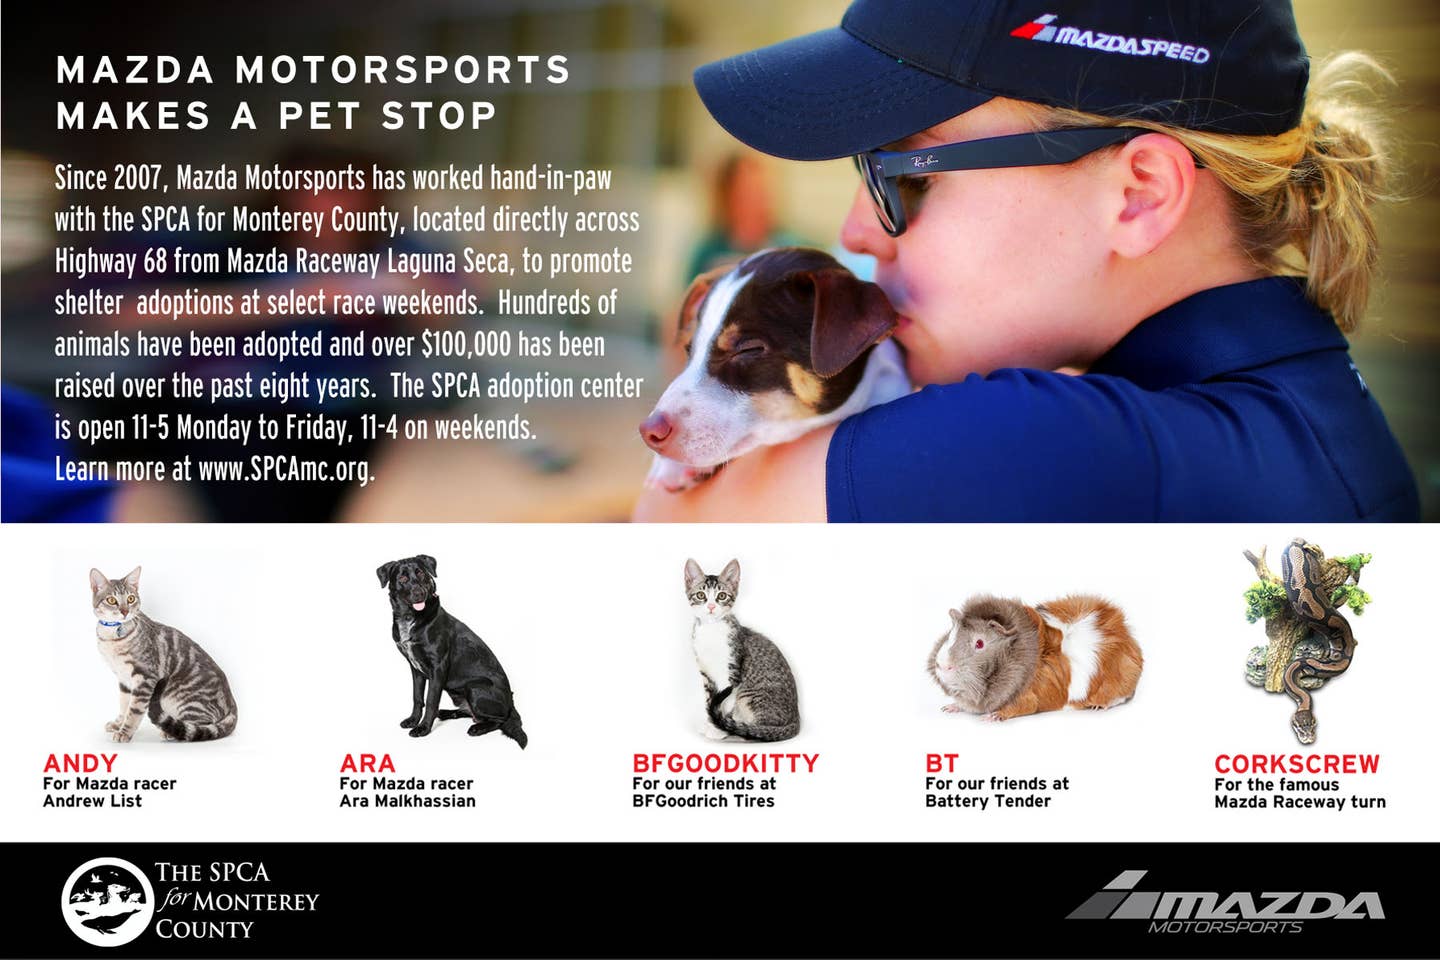 This Story Has Pictures of Puppies (and Mazdas)